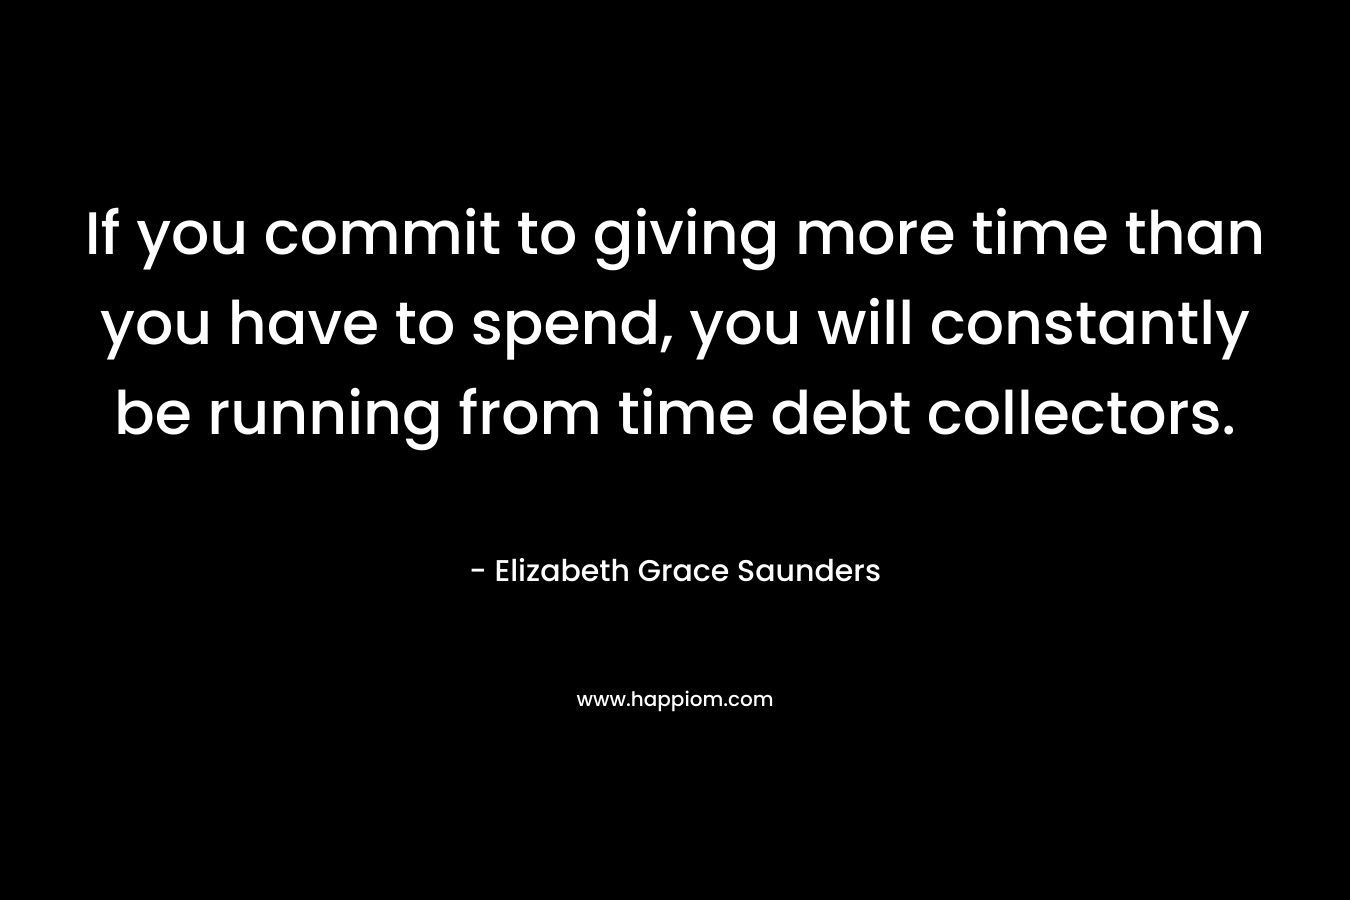 If you commit to giving more time than you have to spend, you will constantly be running from time debt collectors. – Elizabeth Grace Saunders